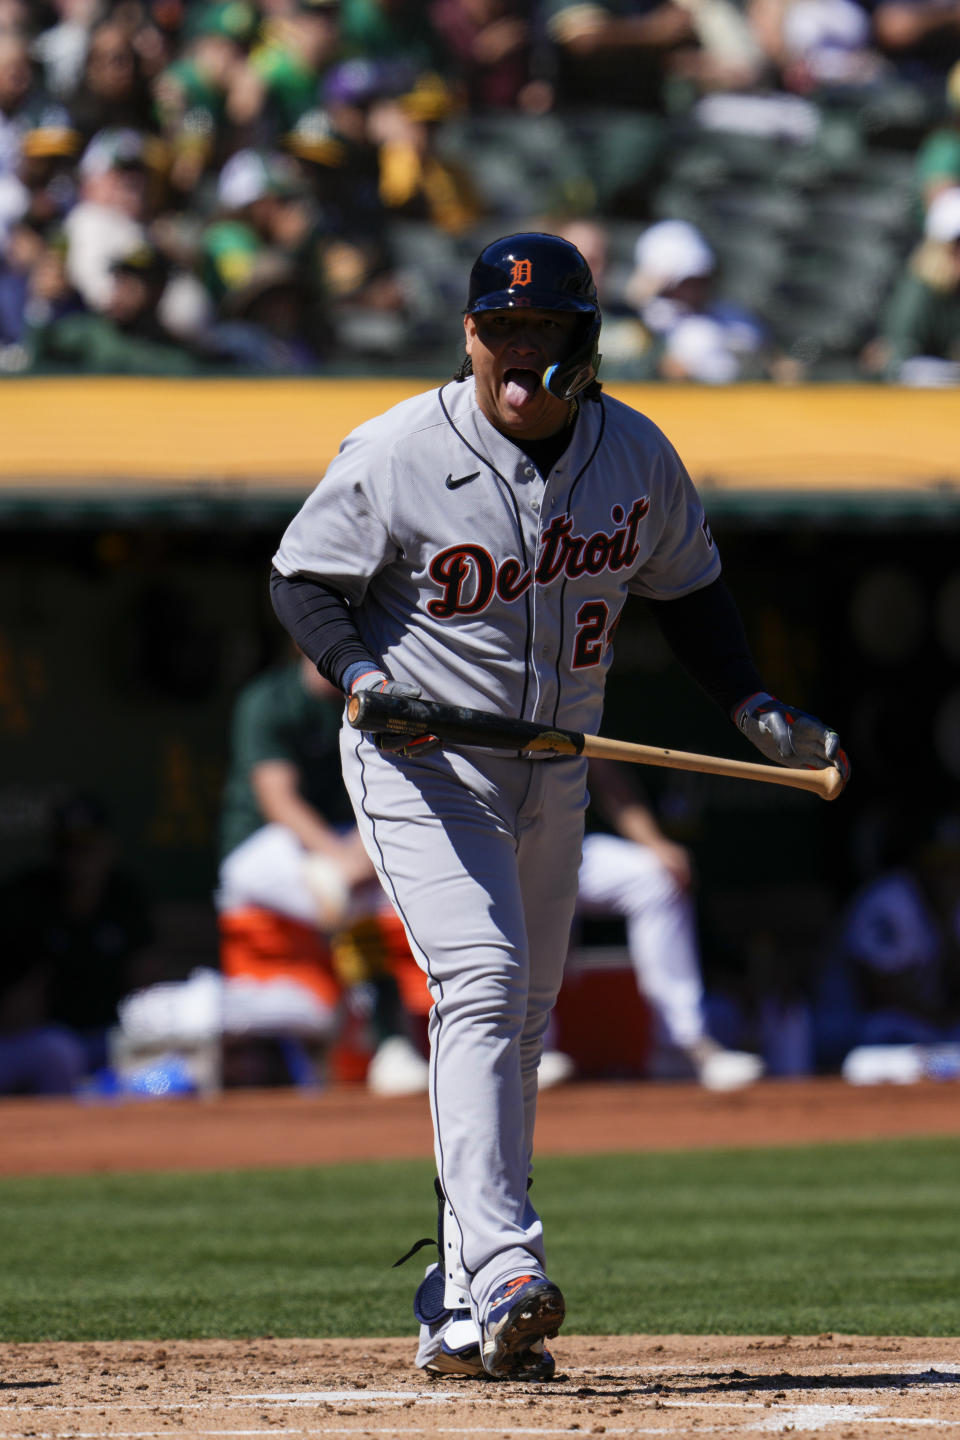 Detroit Tigers' Miguel Cabrera reacts after earning a walk during the third inning of a baseball game against the Oakland Athletics, Sunday, Sept. 24, 2023, in Oakland, Calif. (AP Photo/Godofredo A. Vásquez)